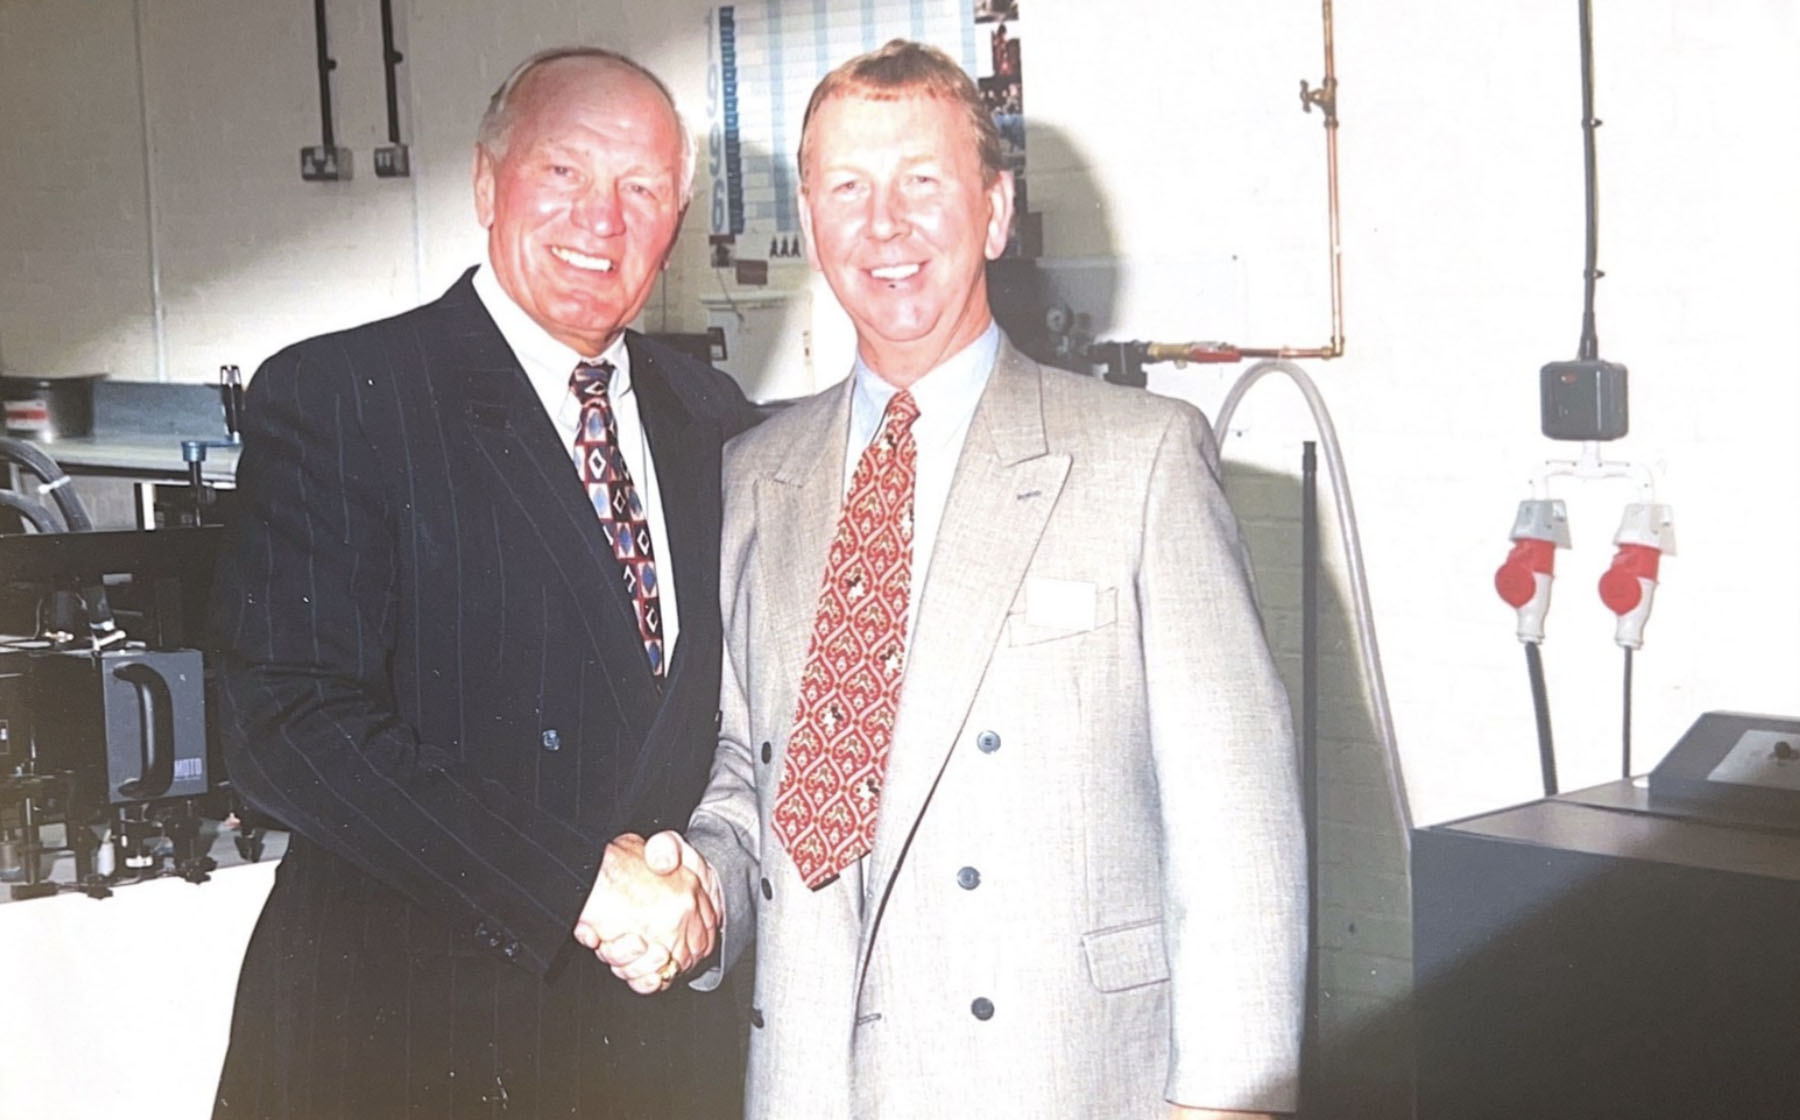 sir_henry_cooper_with_martin_kennedy-copy.jpg